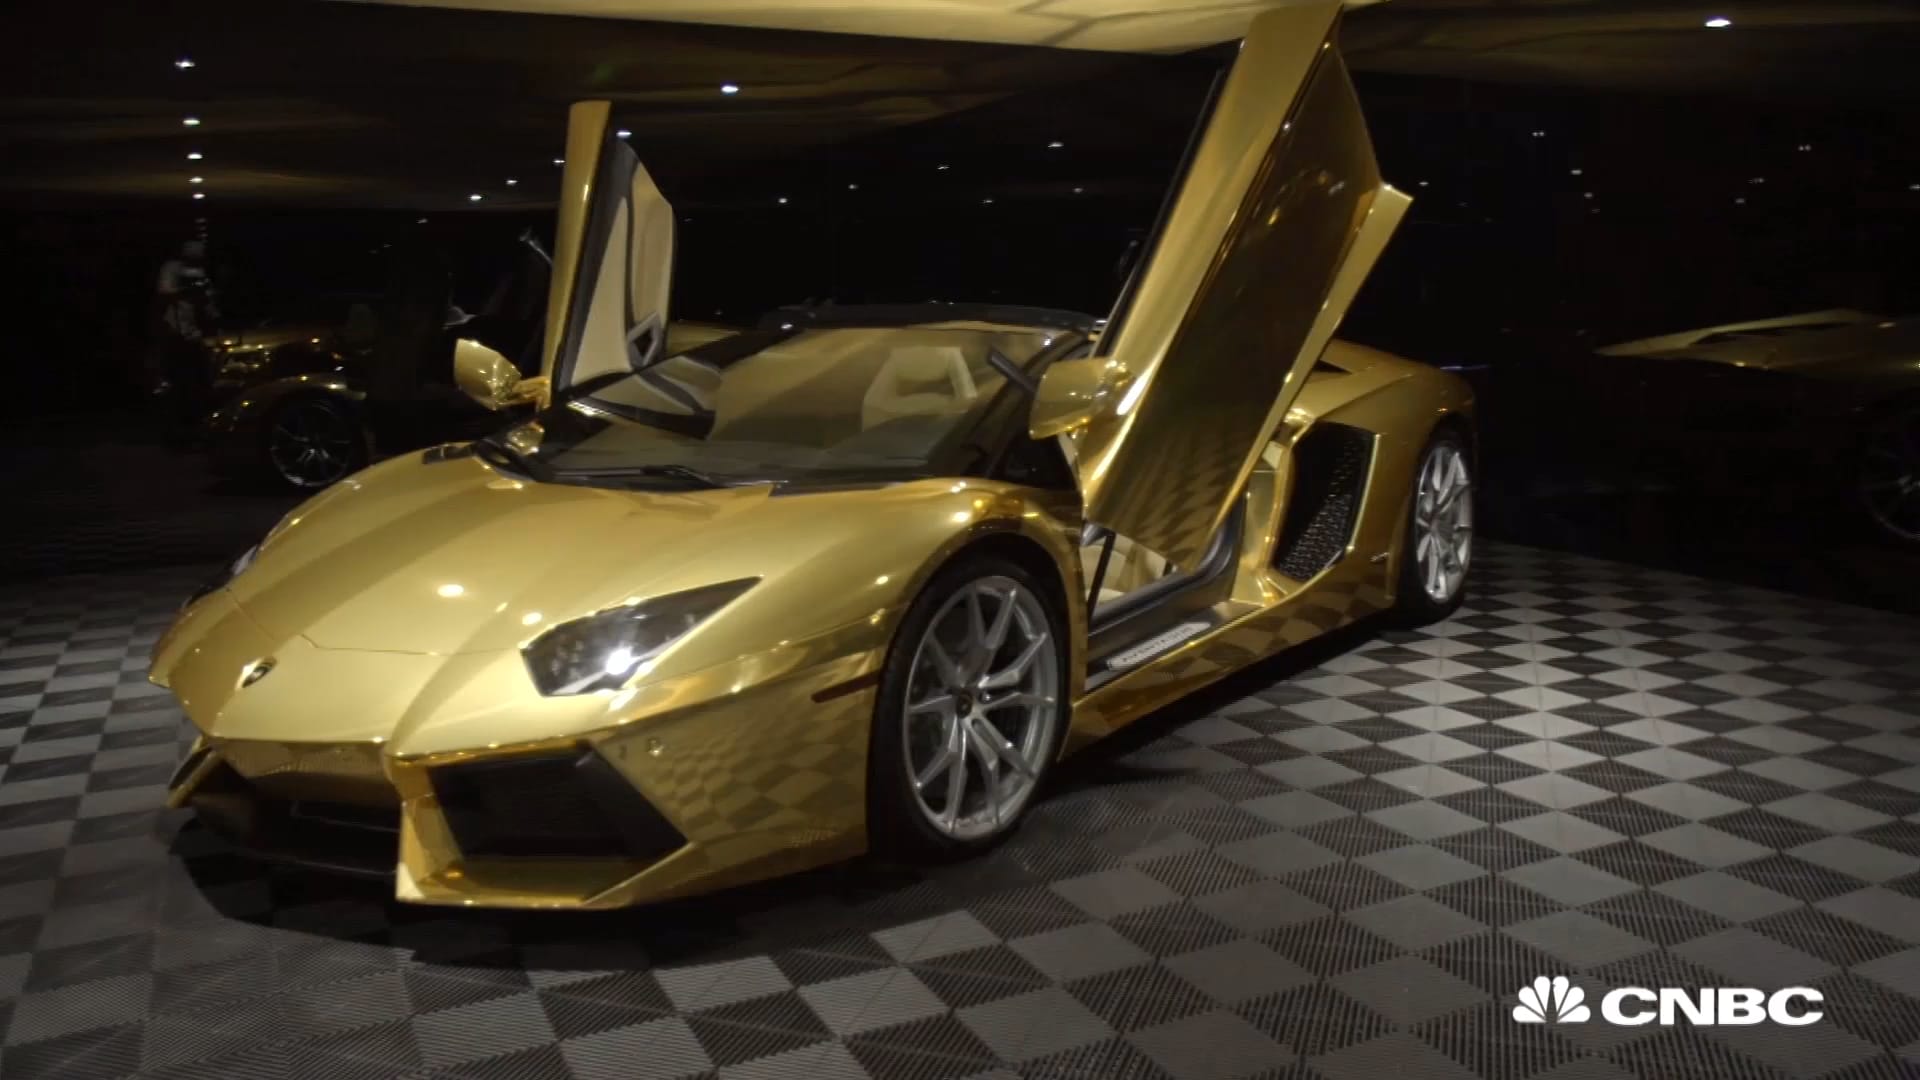 This L.A. Mansion Comes With A Gold Plated Lamborghini